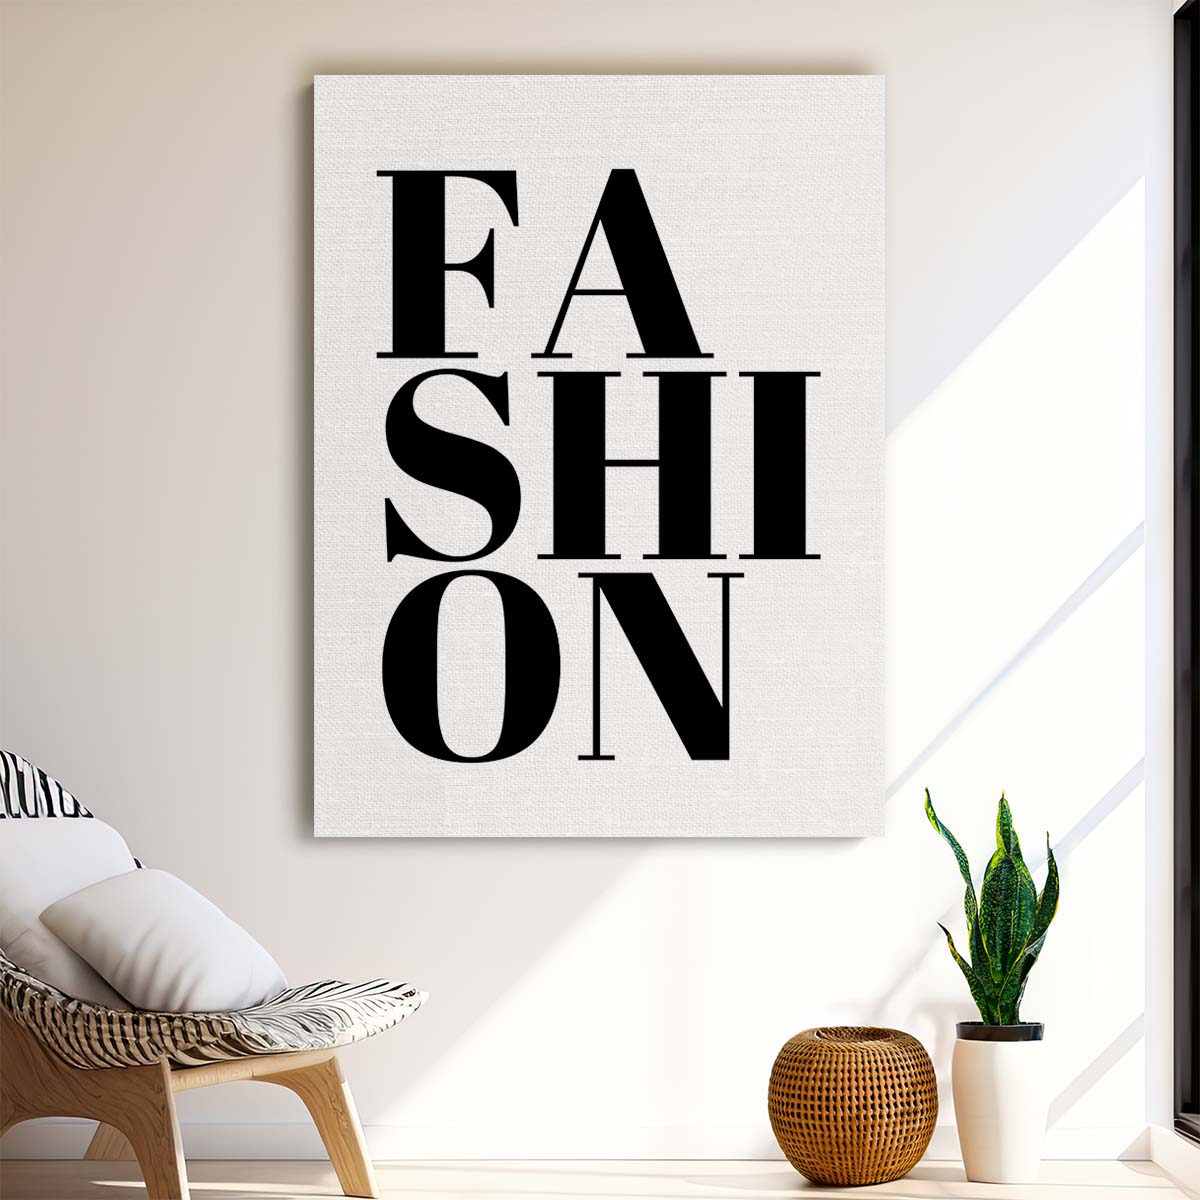 Minimalist Fashion Quote Illustration by Kristina N - Monochrome Wall Art by Luxuriance Designs, made in USA